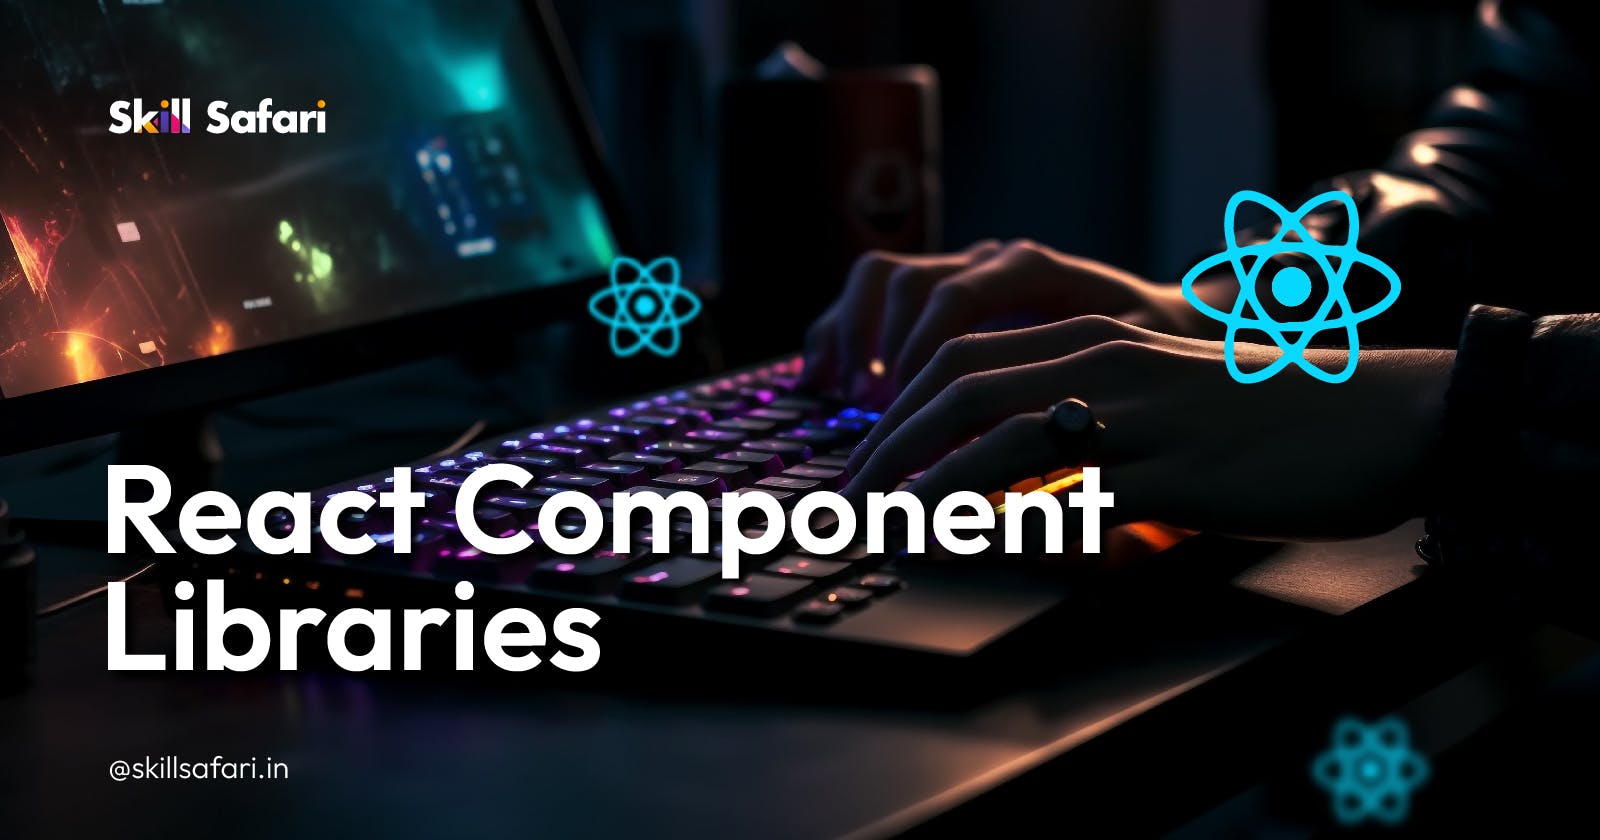 Top 3 React Component Libraries